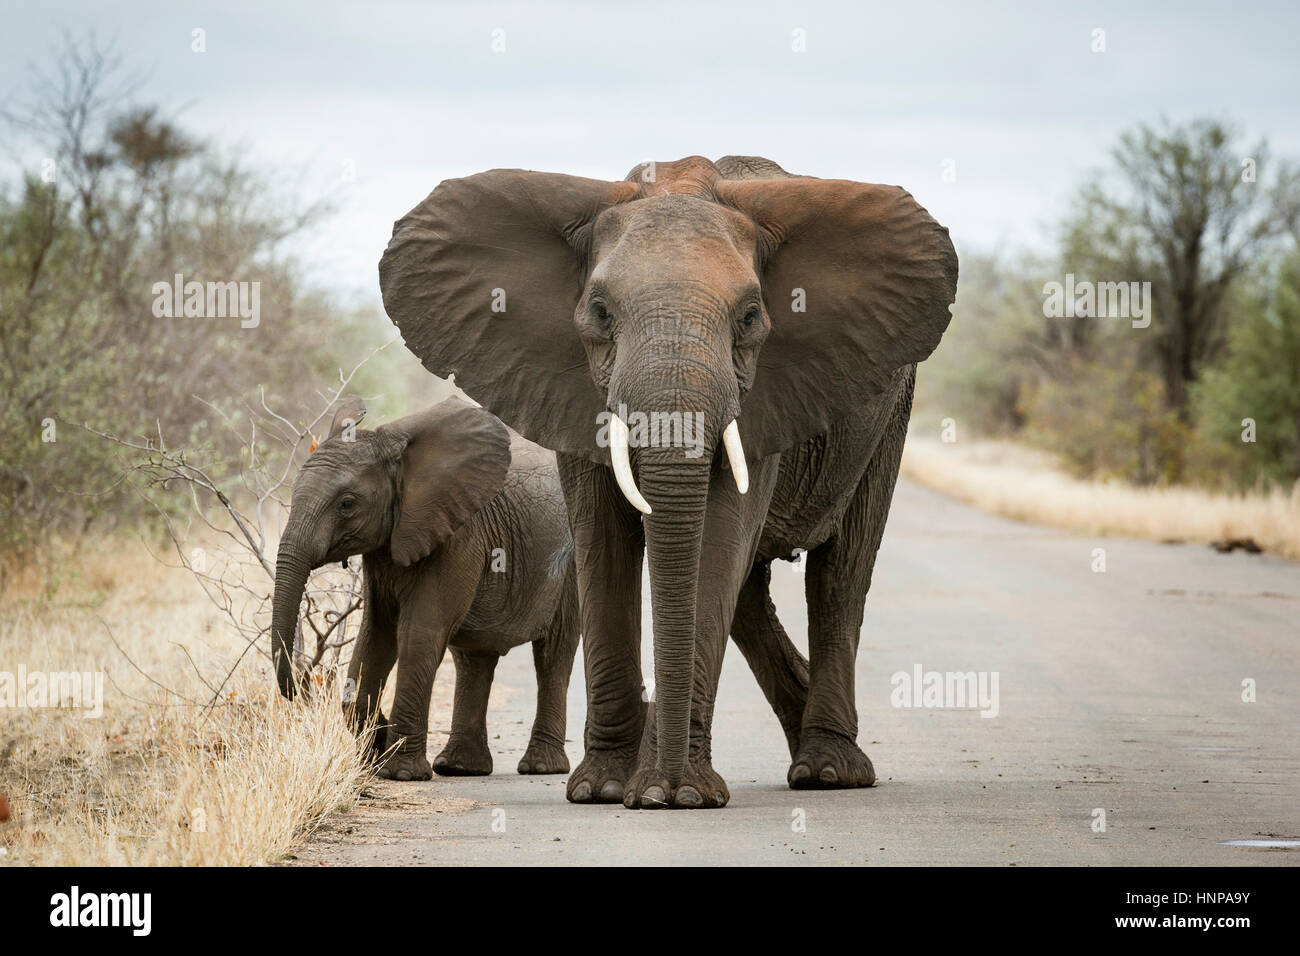 African elephant (Loxodonta africana), mother with young on street, Kruger National Park, South Africa Stock Photo